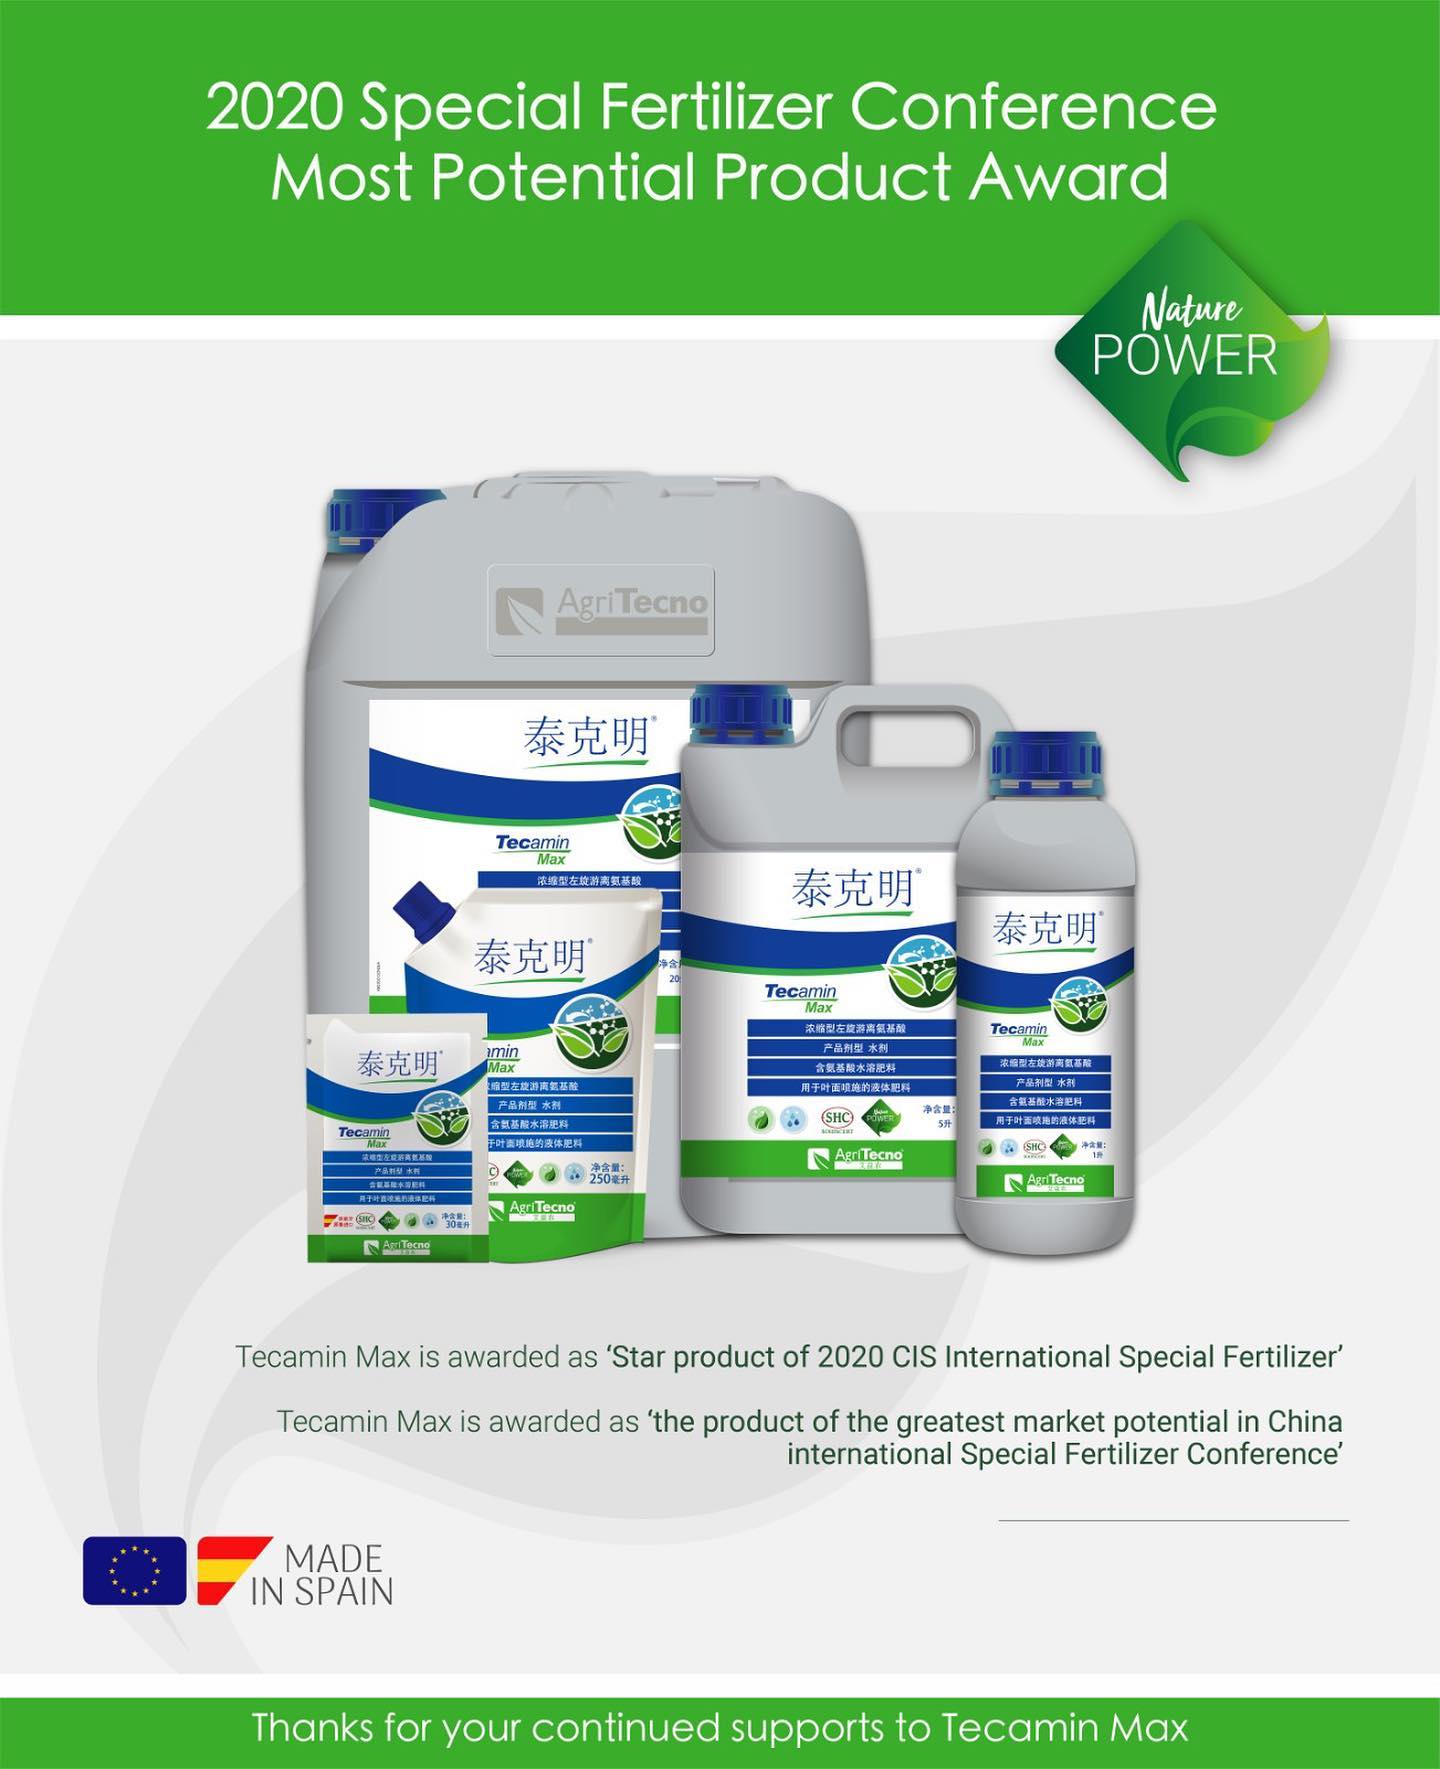 #TecaminMax is awarded as Star product & as the product of greatest  potencial in #china of 2020 CIS International Special Fertilizers.  for our China team- your effort is gadly appreciated, con…